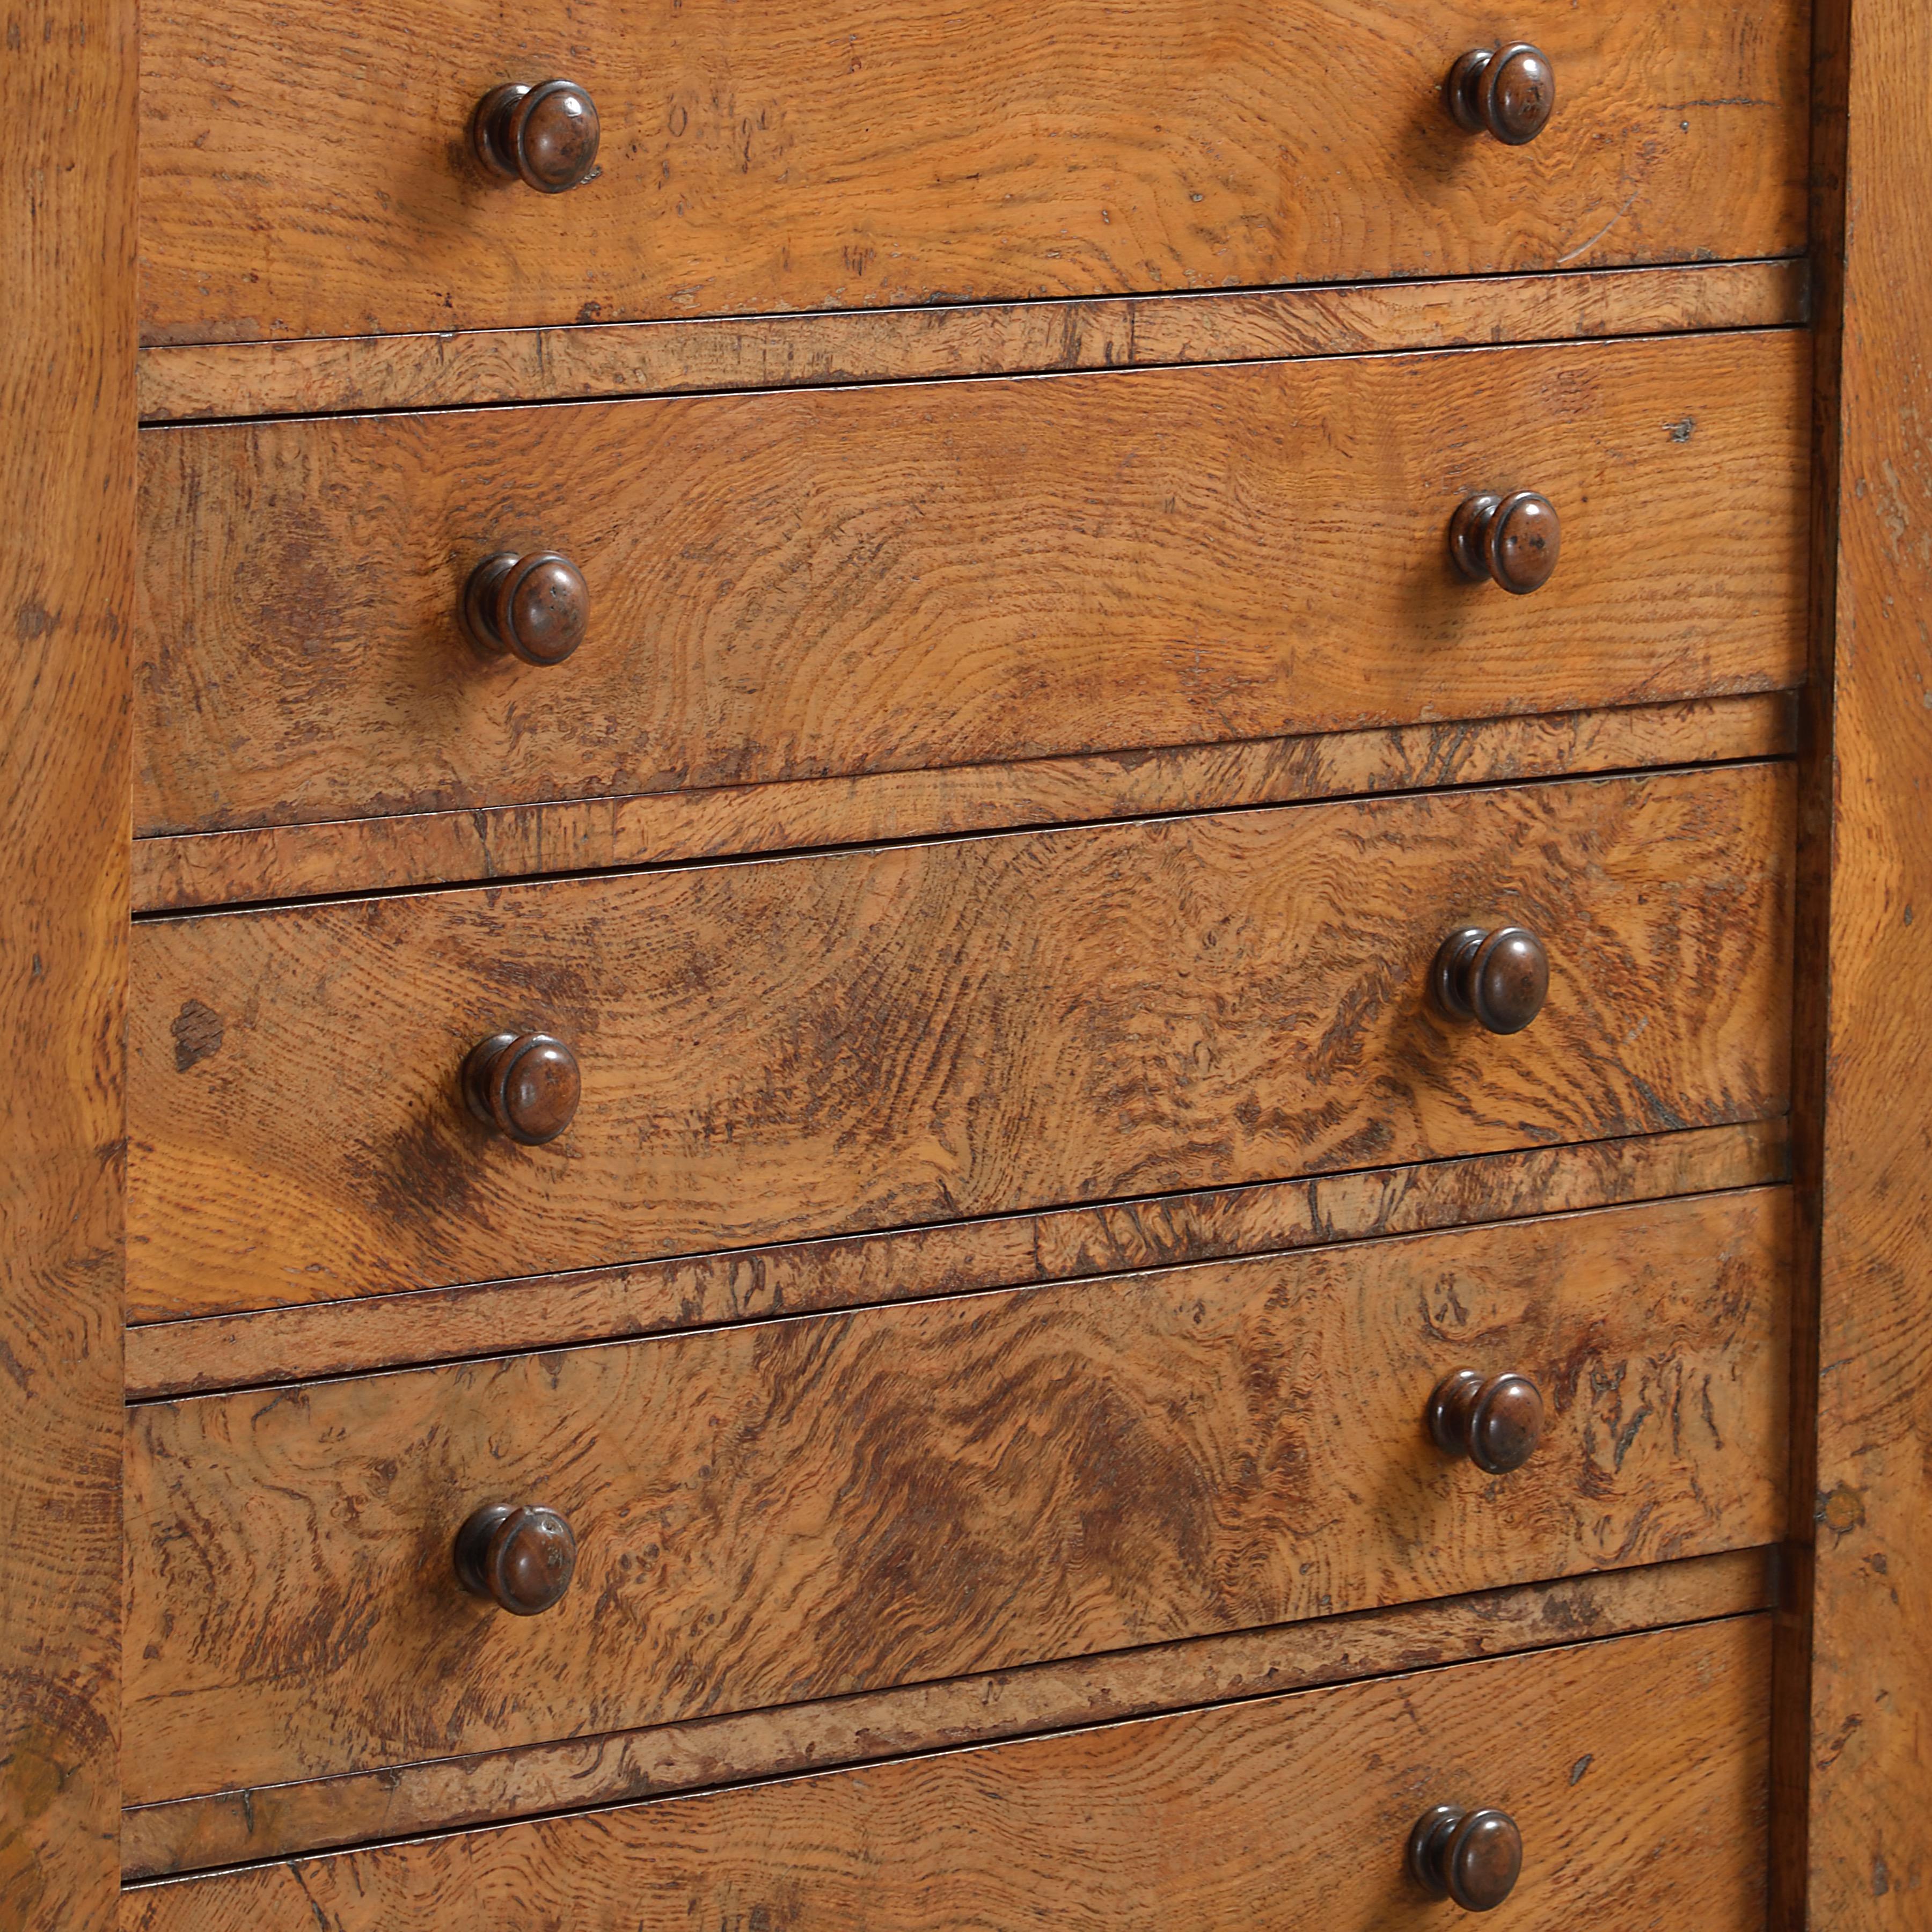 A fine early Victorian pollard oak Wellington chest, with eleven cedar-lined drawers, circa 1840. 

Labelled: Alexander Grant & Son, Cabinet Makers, Liverpool.